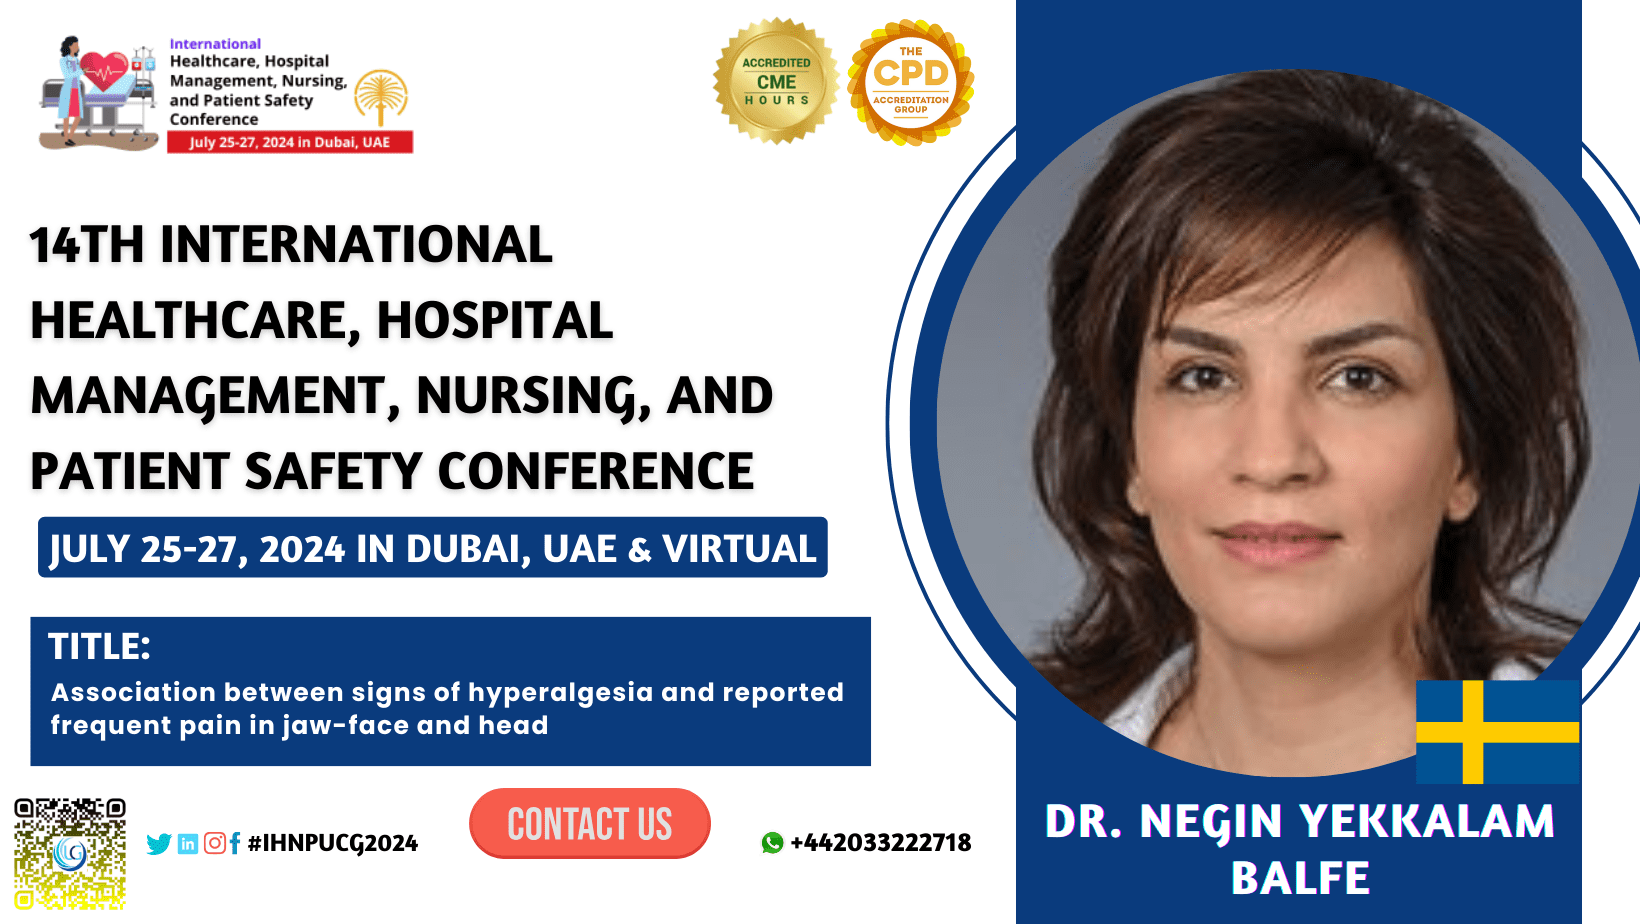 Dr. Negin Yekkalam Balfe_14th International Healthcare, Hospital Management, Nursing, and Patient Safety Conference